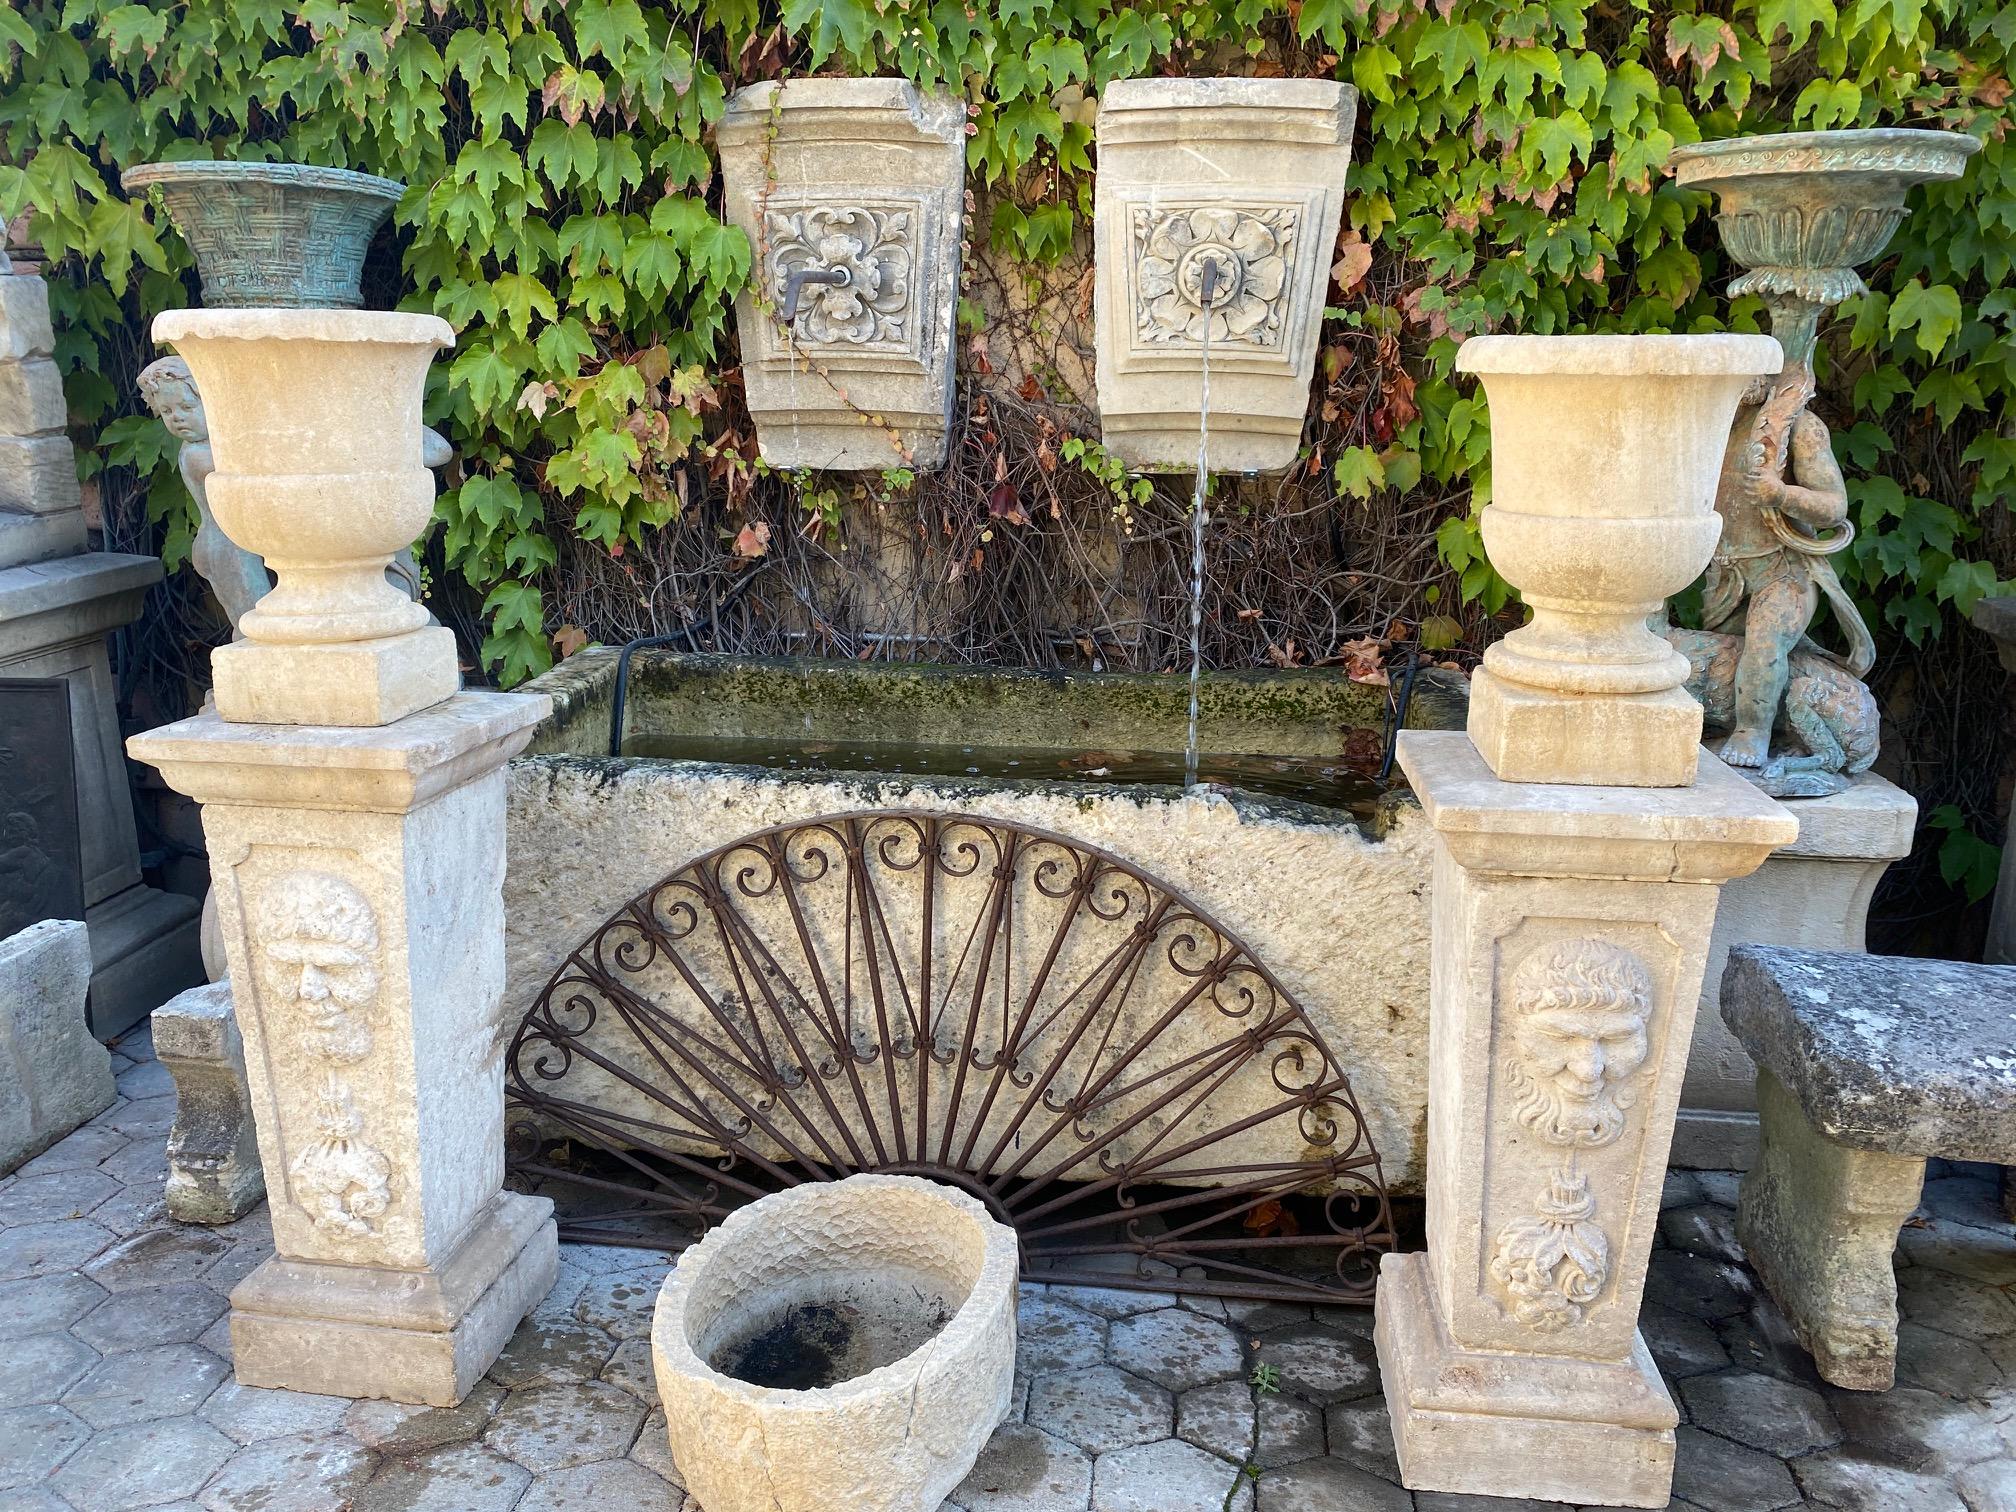 Pair hand carved stone pillar finials decorative urns vase rustic antiques LA CA . Pair 19th century hand carved stone finials urns vase shape to mount on garden post by a gate or simply using it as beautiful decorative element in an interior on a